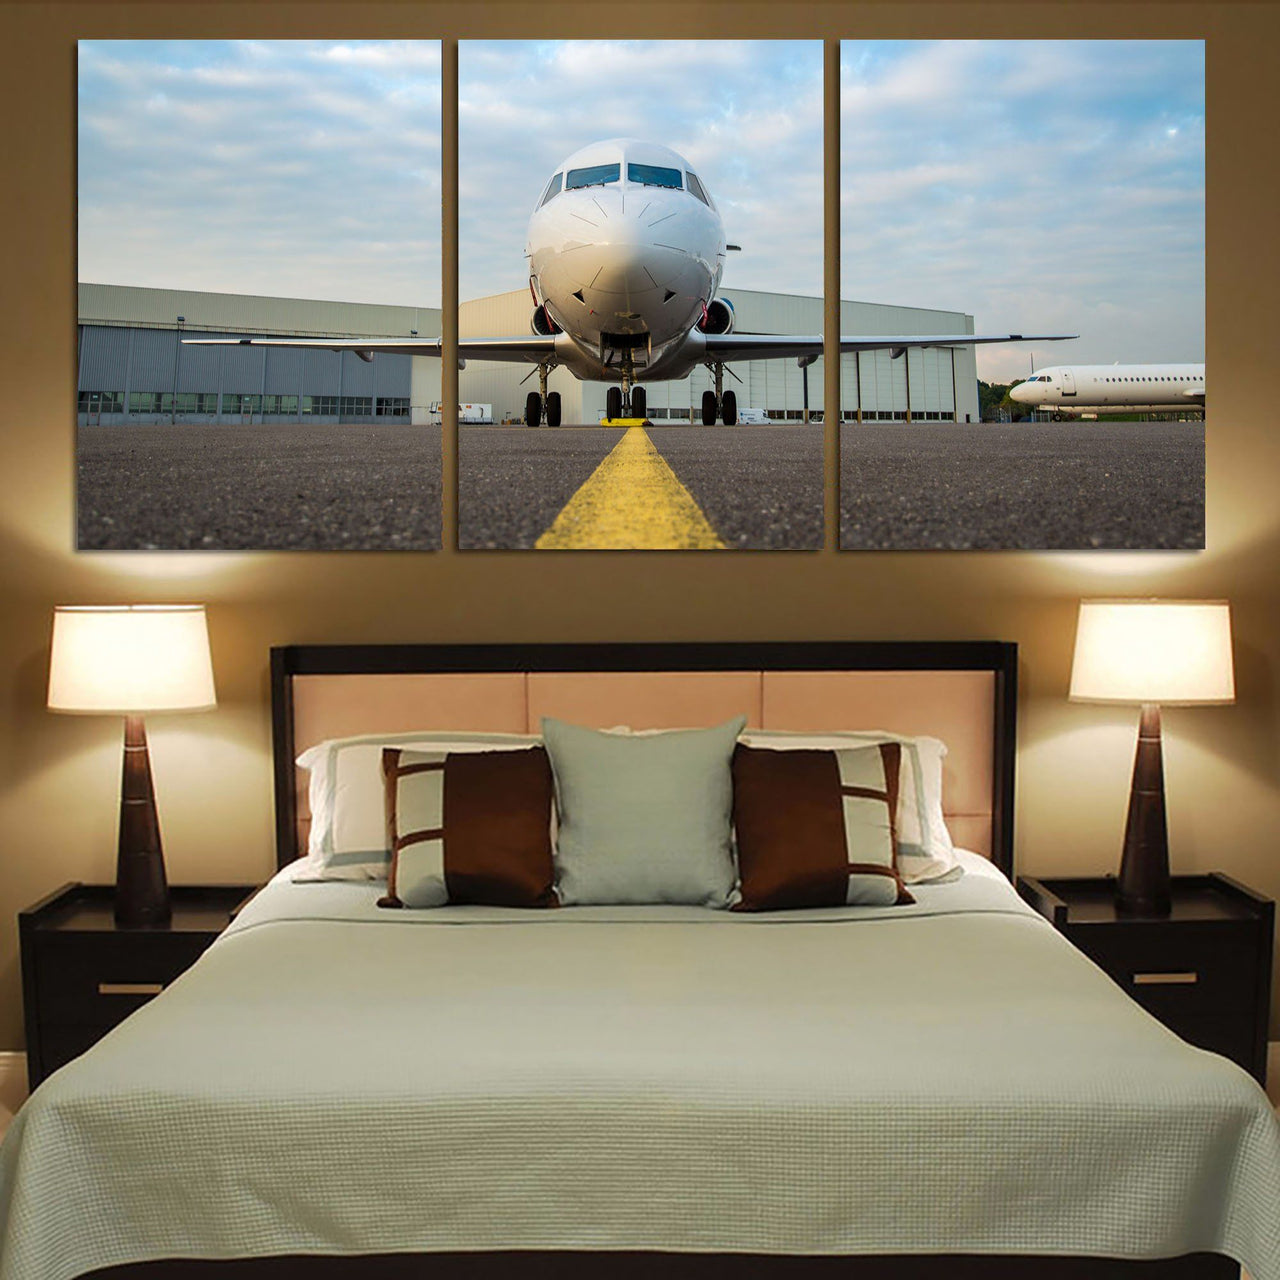 Face to Face with Beautiful Jet Printed Canvas Posters (3 Pieces) Aviation Shop 